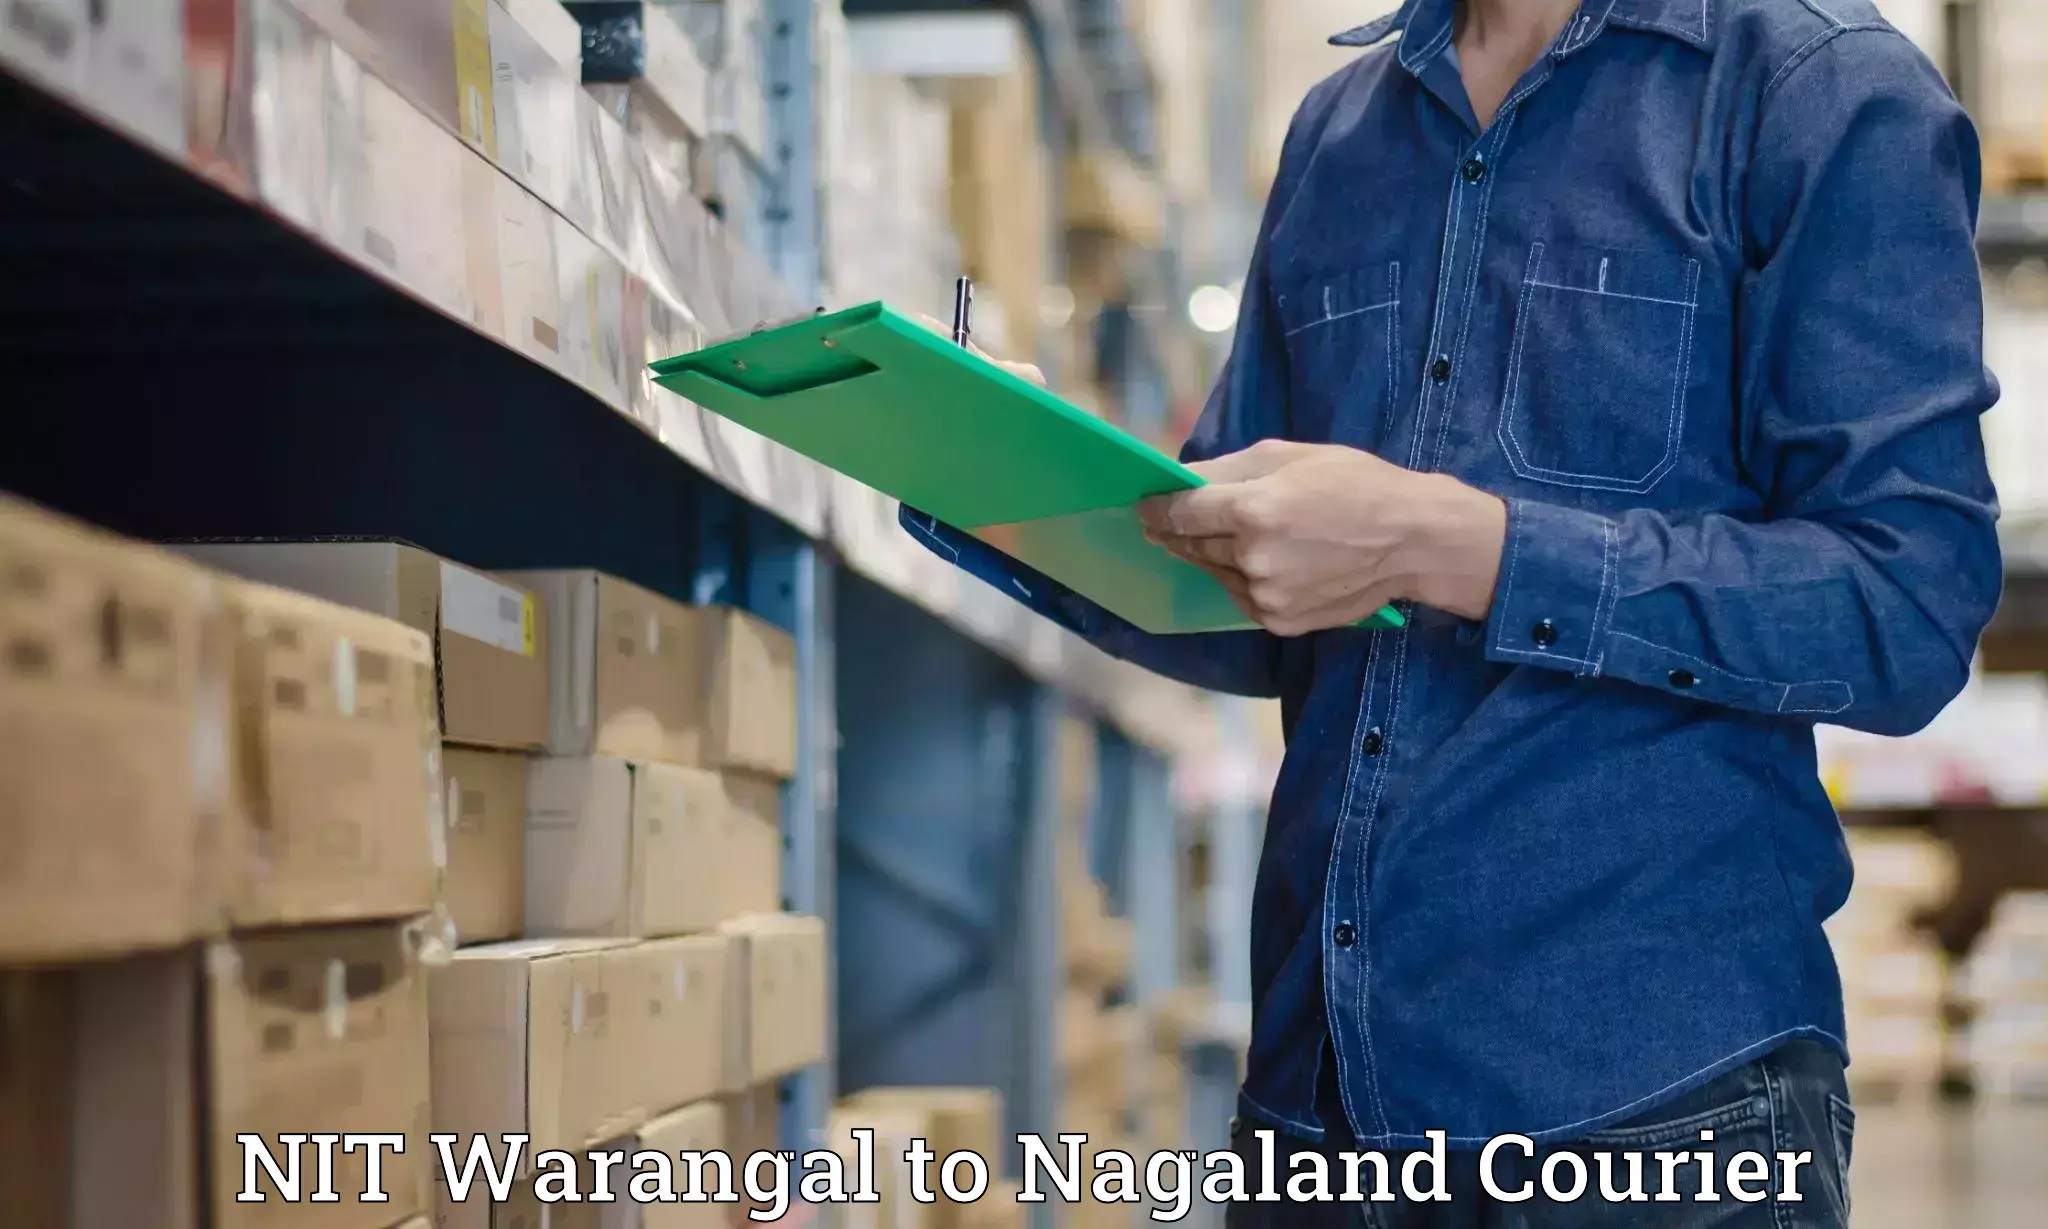 Reliable shipping partners in NIT Warangal to NIT Nagaland